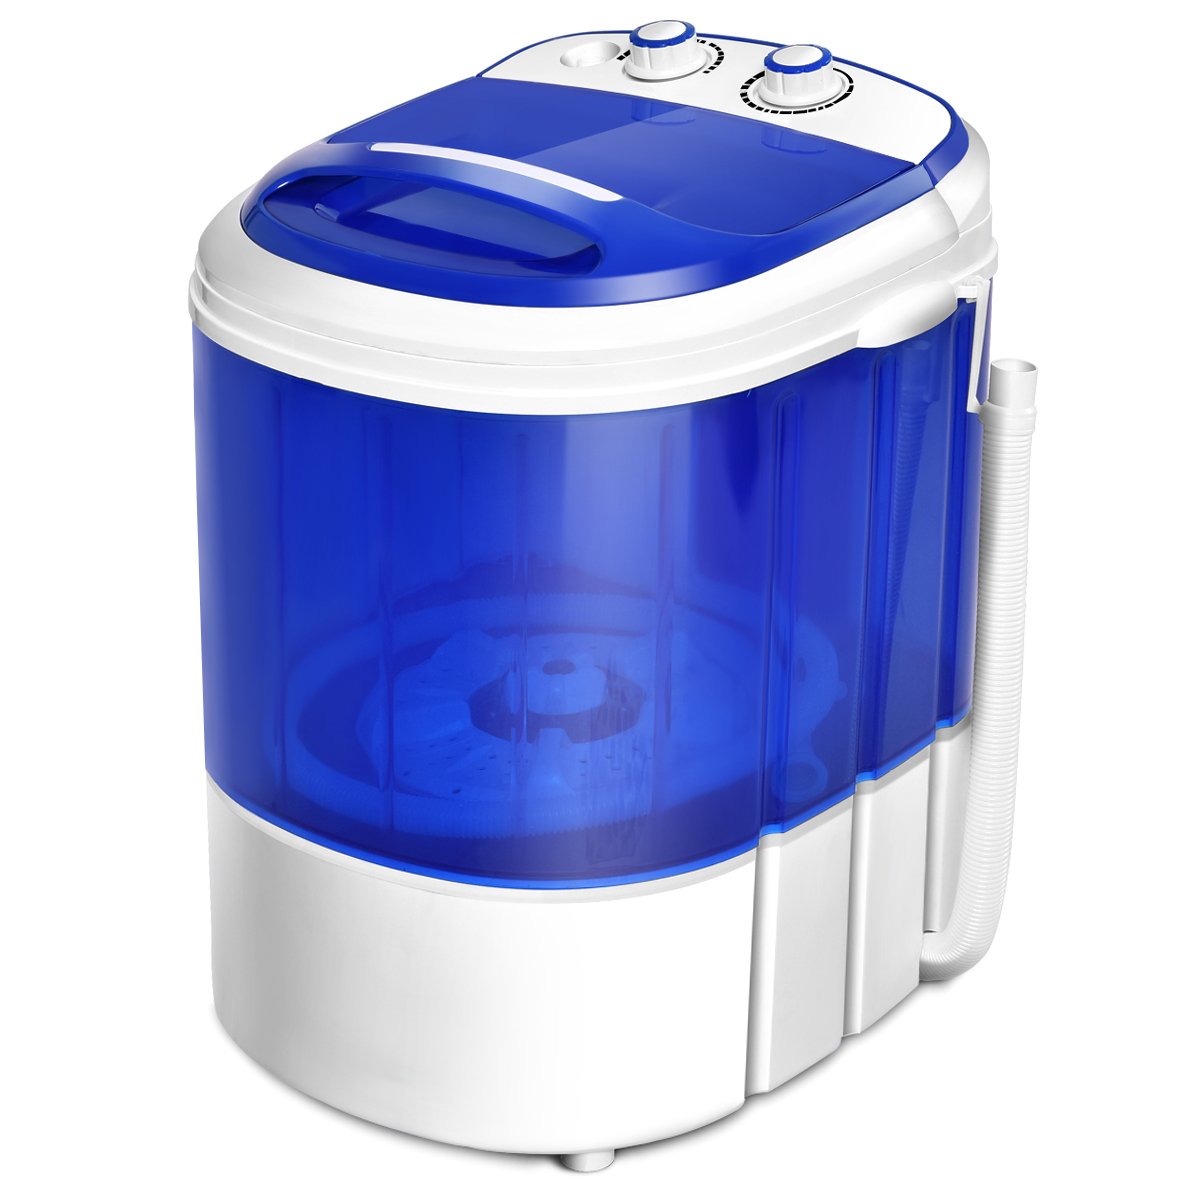 COSTWAY Mini Washing Machine, Portable Washer for Compact Laundry, Small Semi-Automatic Compact Washing Machine with Timer Control Single Translucent Tub 7lbs Capacity(Blue + White)